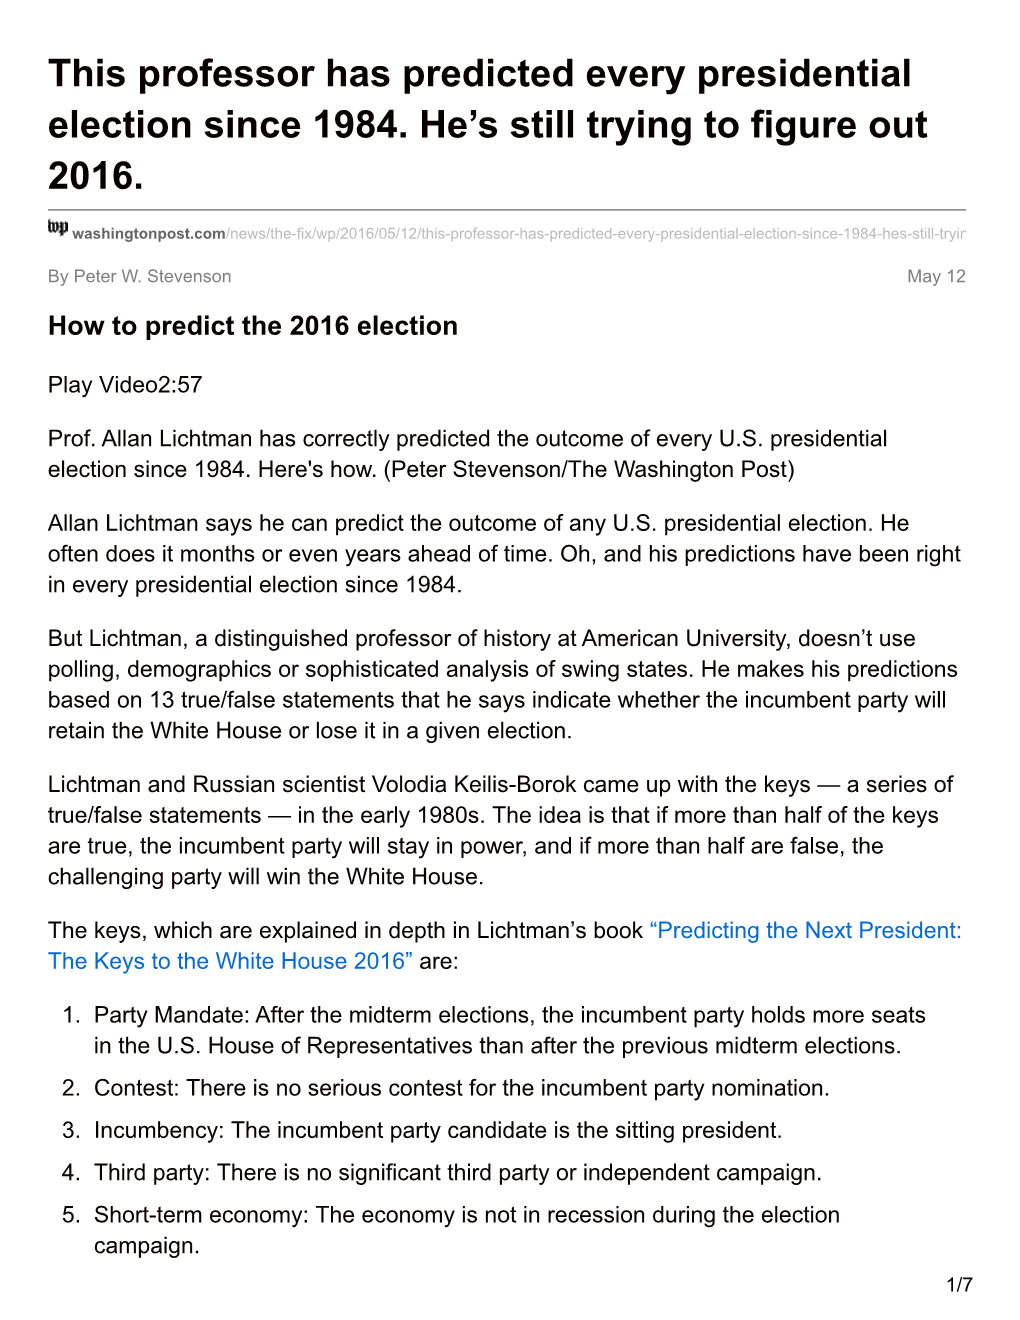 This Professor Has Predicted Every Presidential Election Since 1984